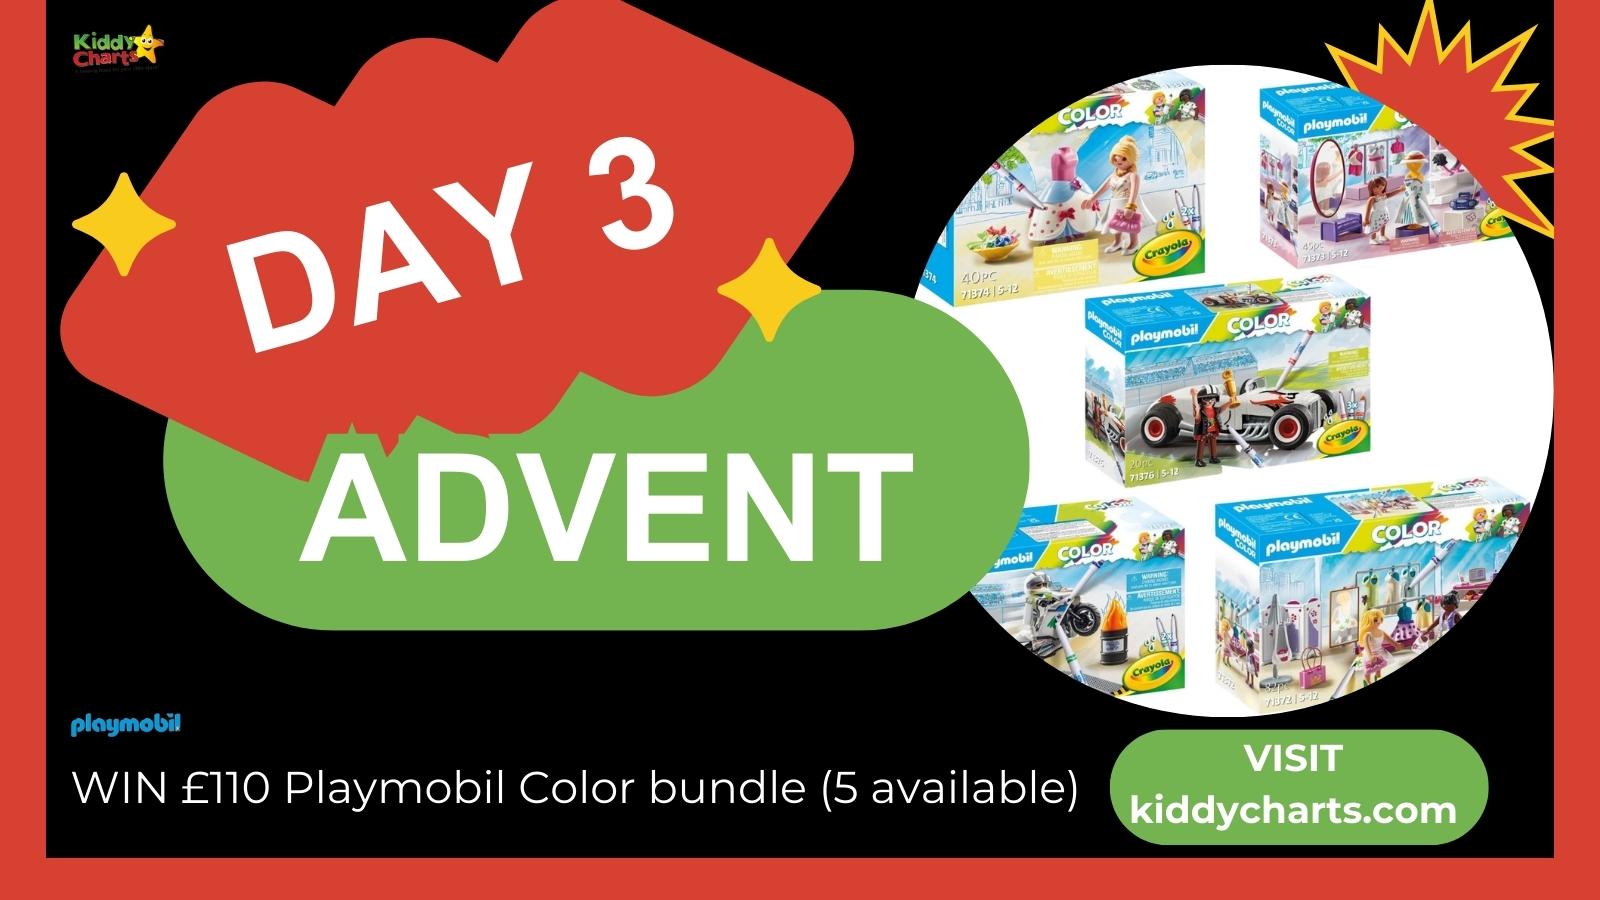 Day 3: Win £110 bundle of Playmobil color (5 available) #KiddyChartsAdvent